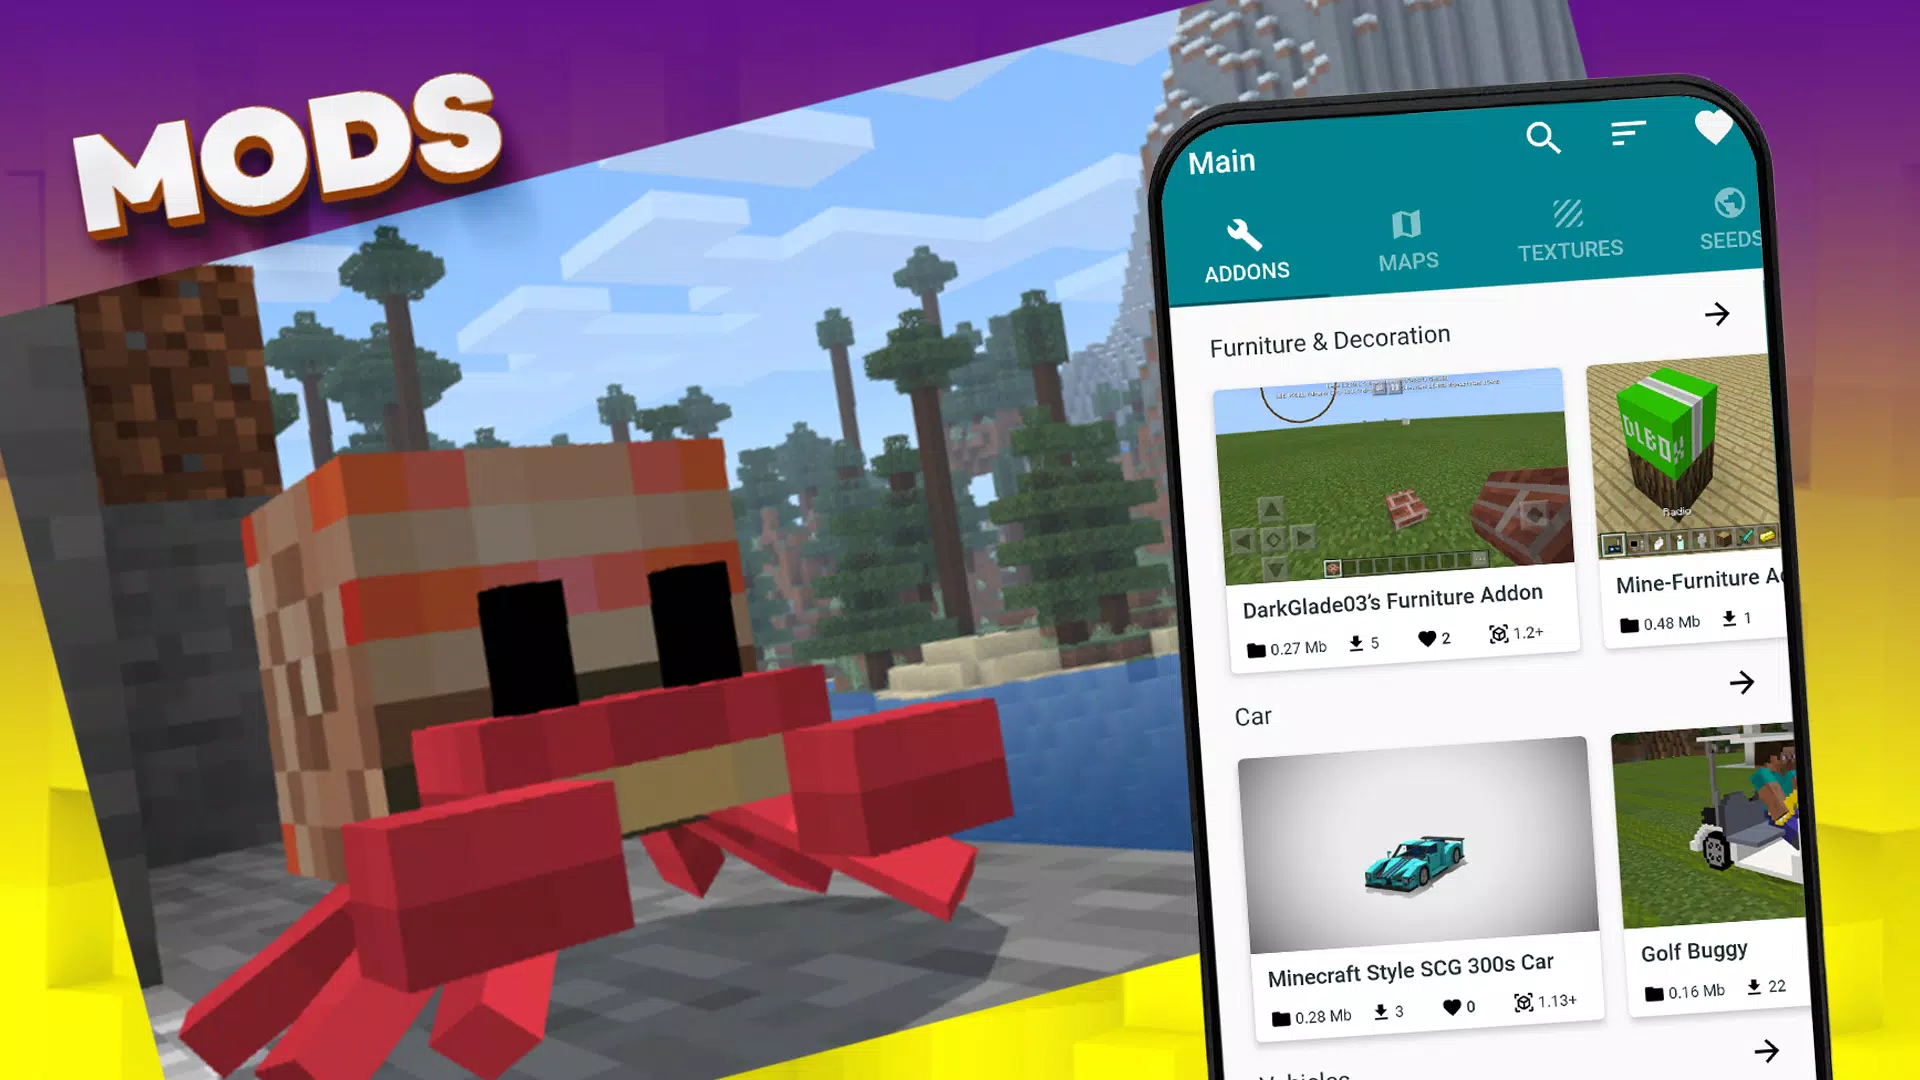 MONSTER-MCPE  Addons, Mods, Maps and More For Minecraft PE